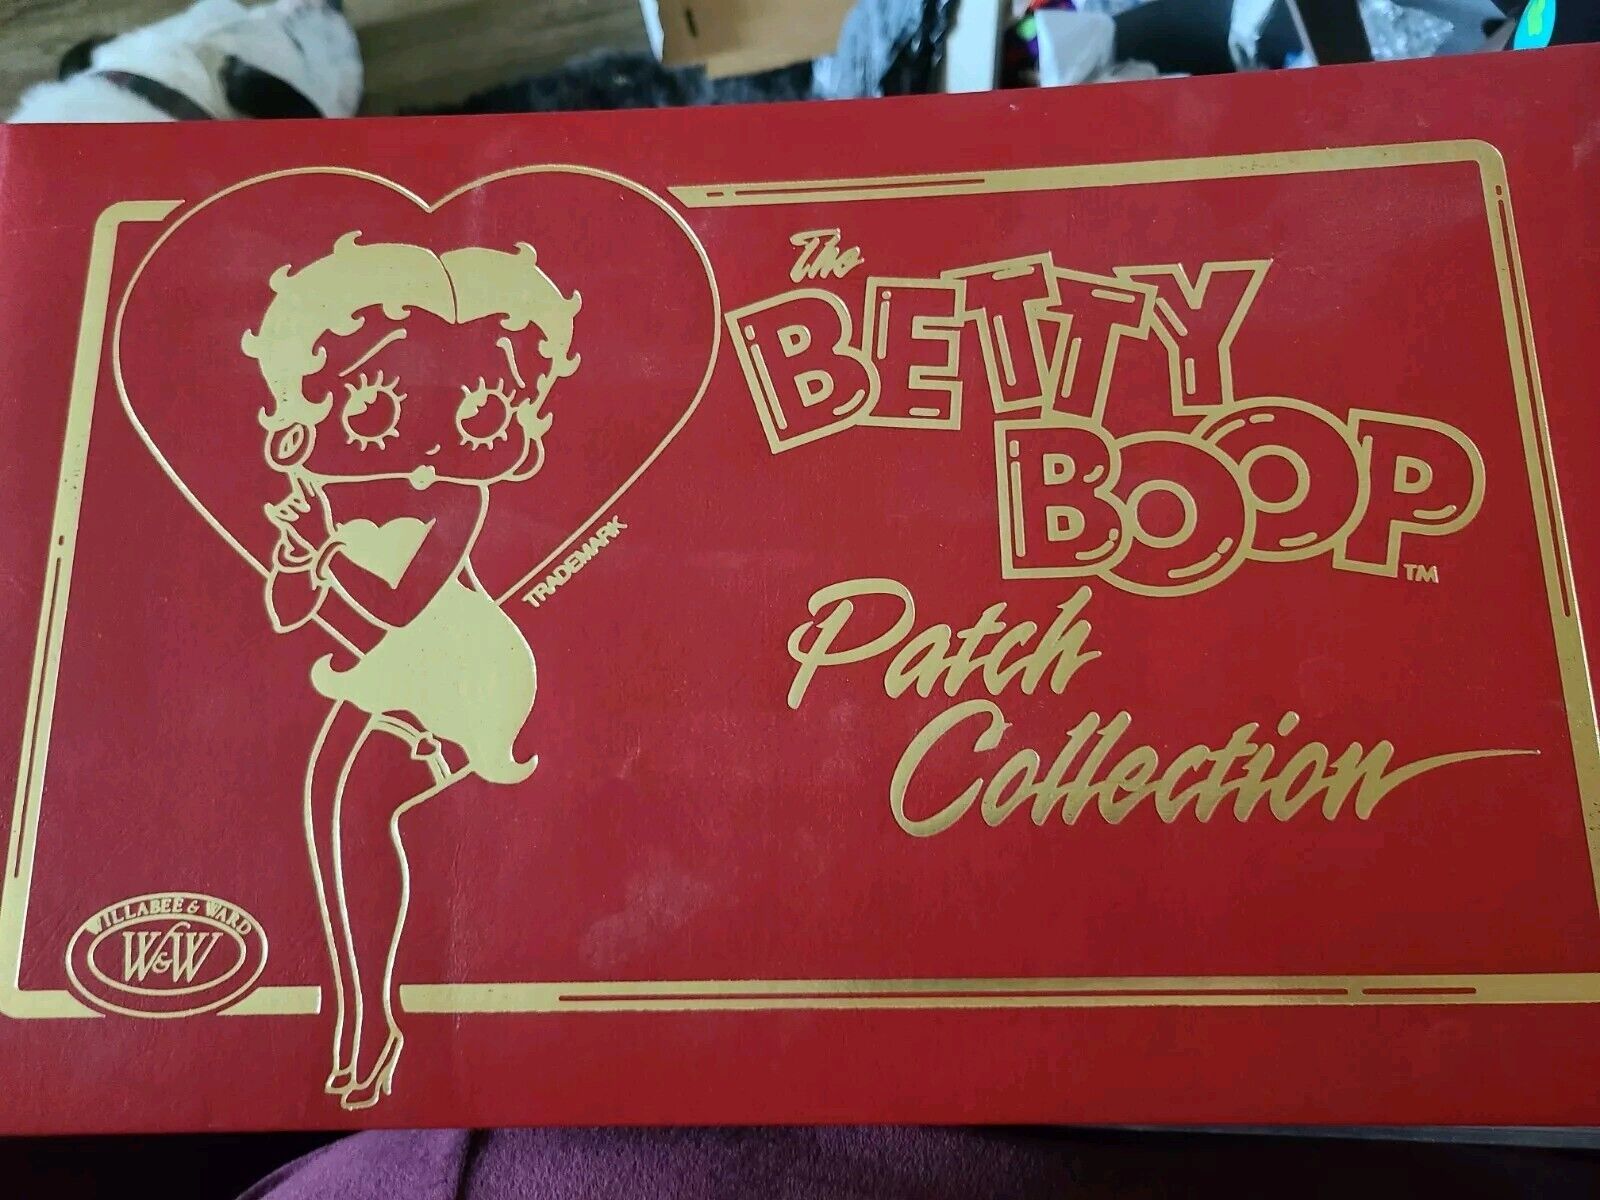 Betty Boop Patch Collection in Red Binder Willabee and Ward 